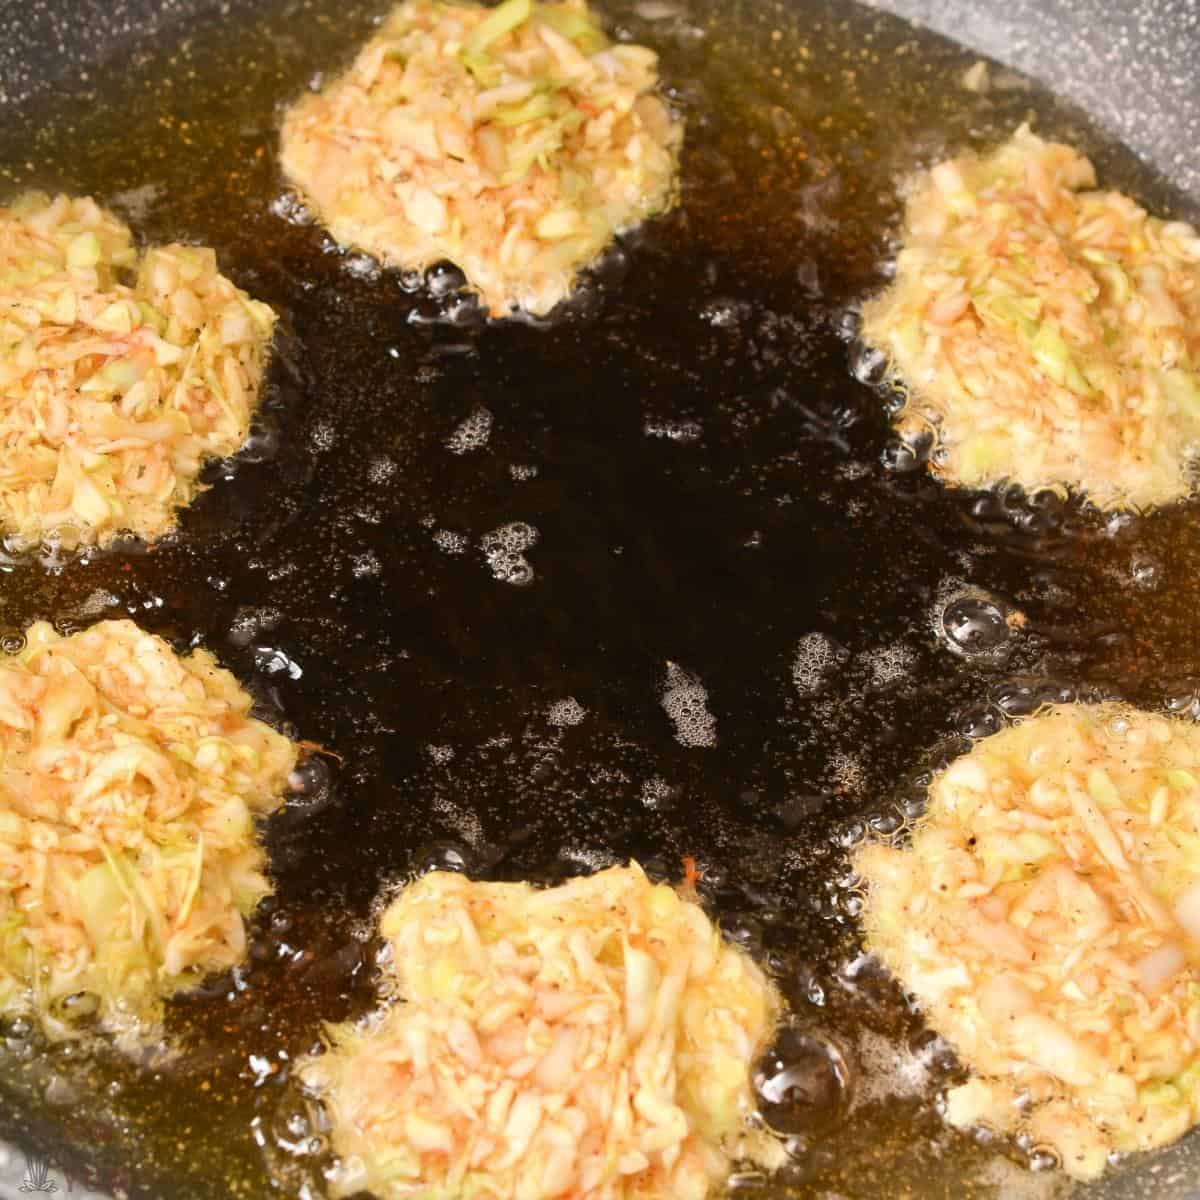 cabbage hash browns cooking in hot oil.